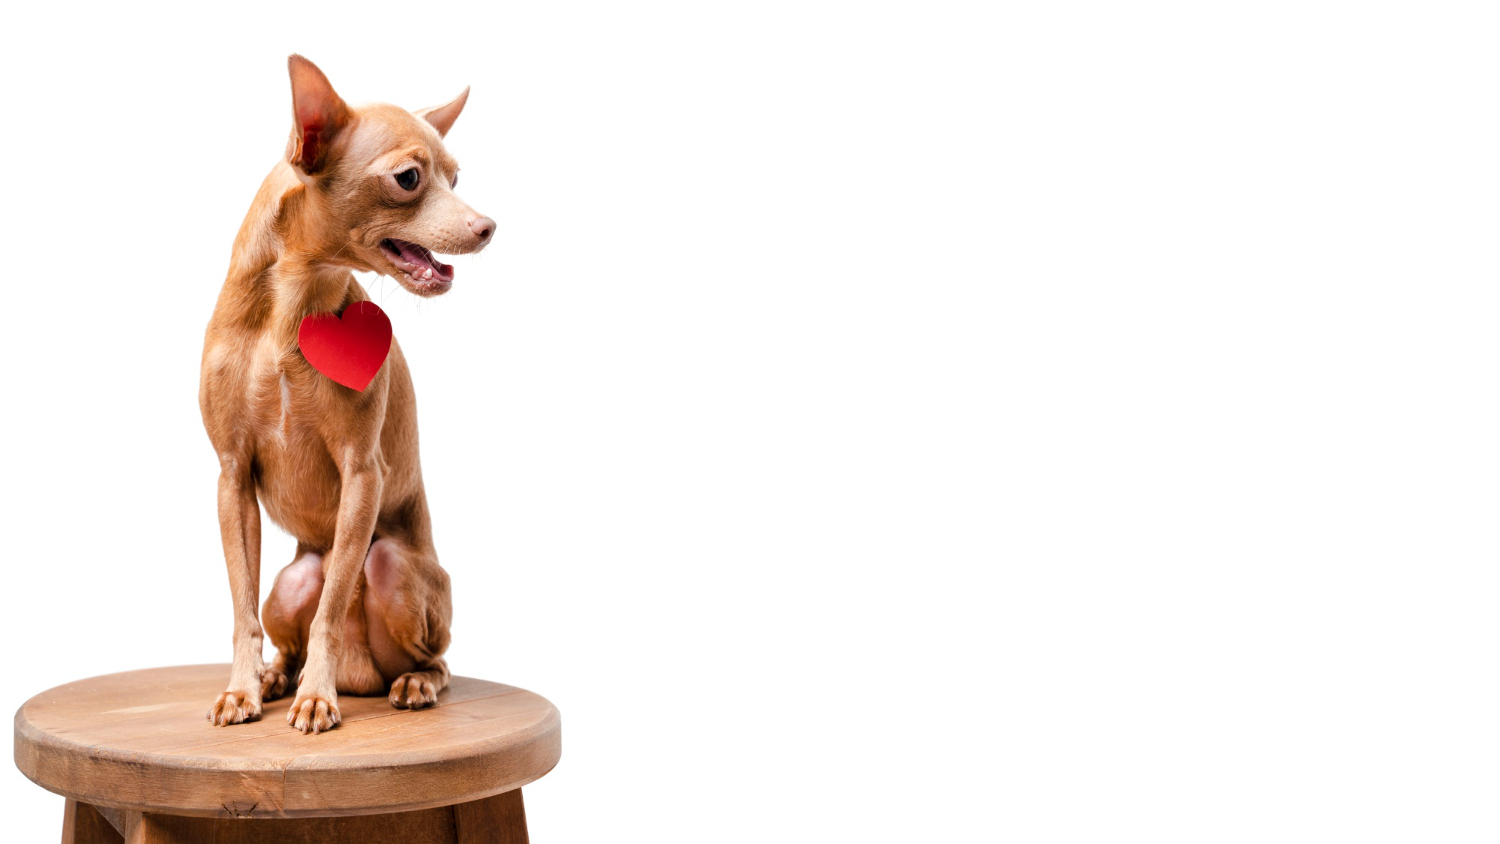 What does a pregnant chihuahua look like?